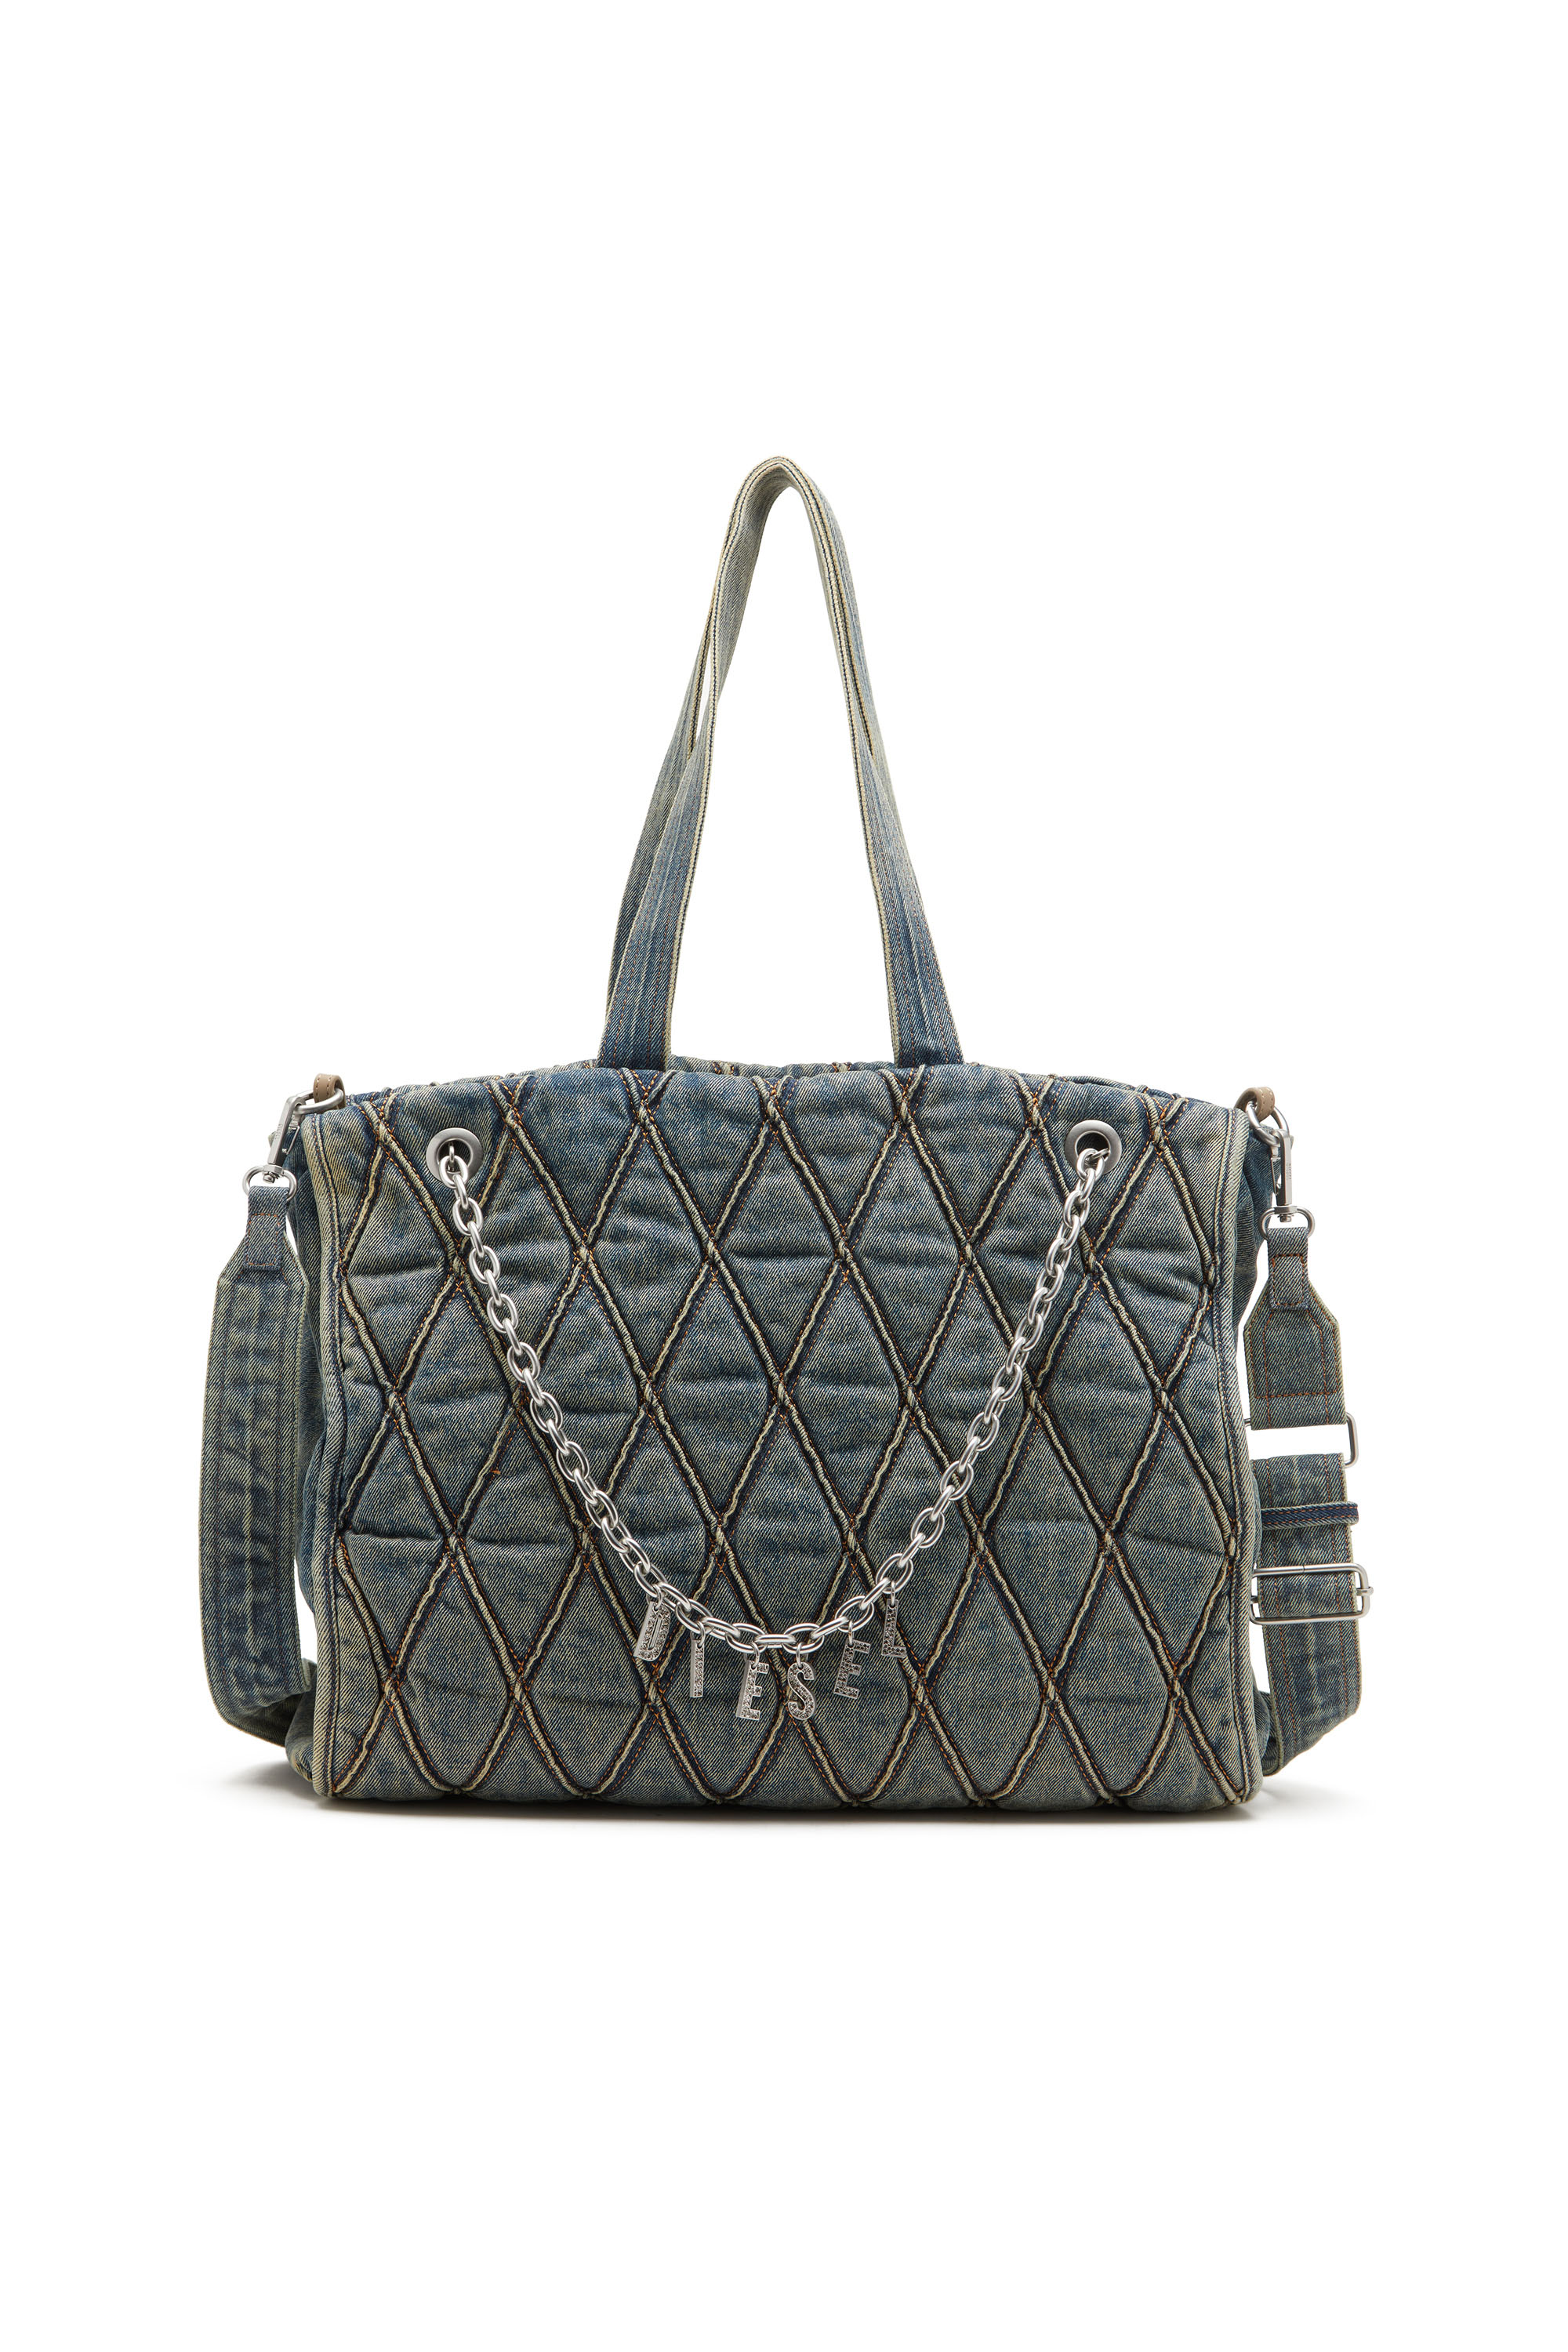 Diesel - CHARM-D SHOPPER, Female Charm-D-Tote bag in Argyle quilted denim in ブルー - Image 1